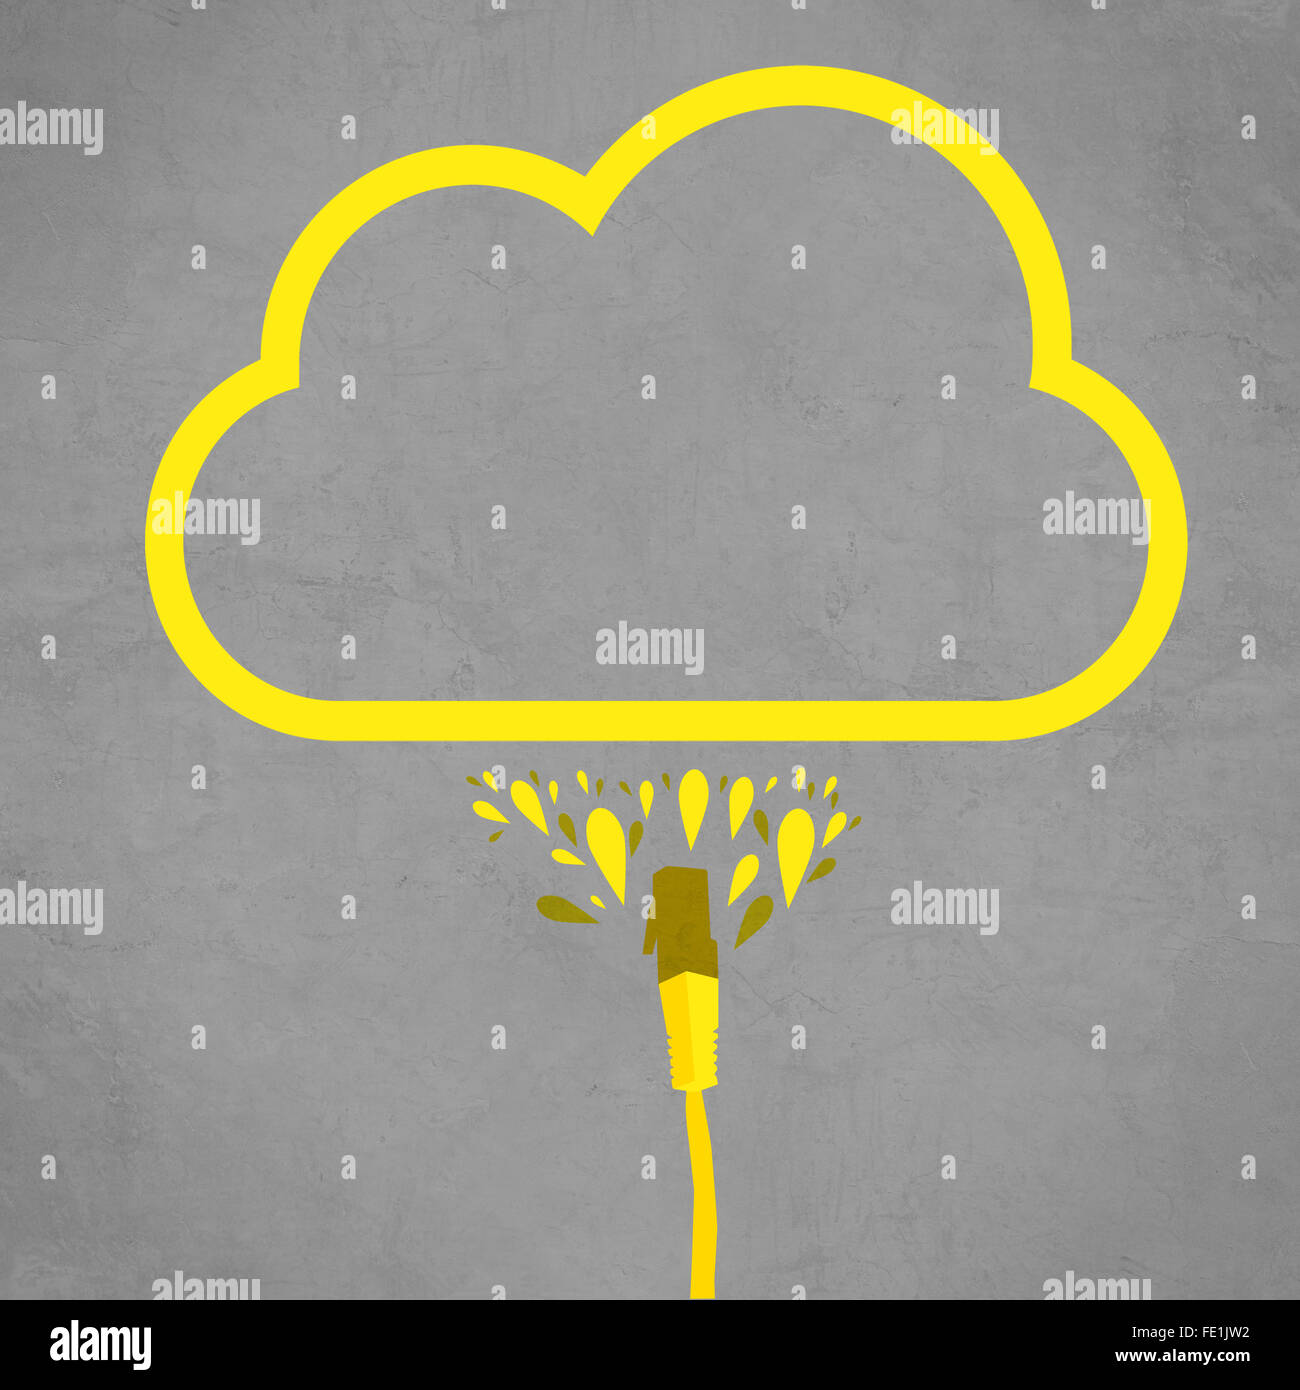 LAN cable connected to cloud service, simple flat line illustration of internet technology cloud computing concept. Stock Photo